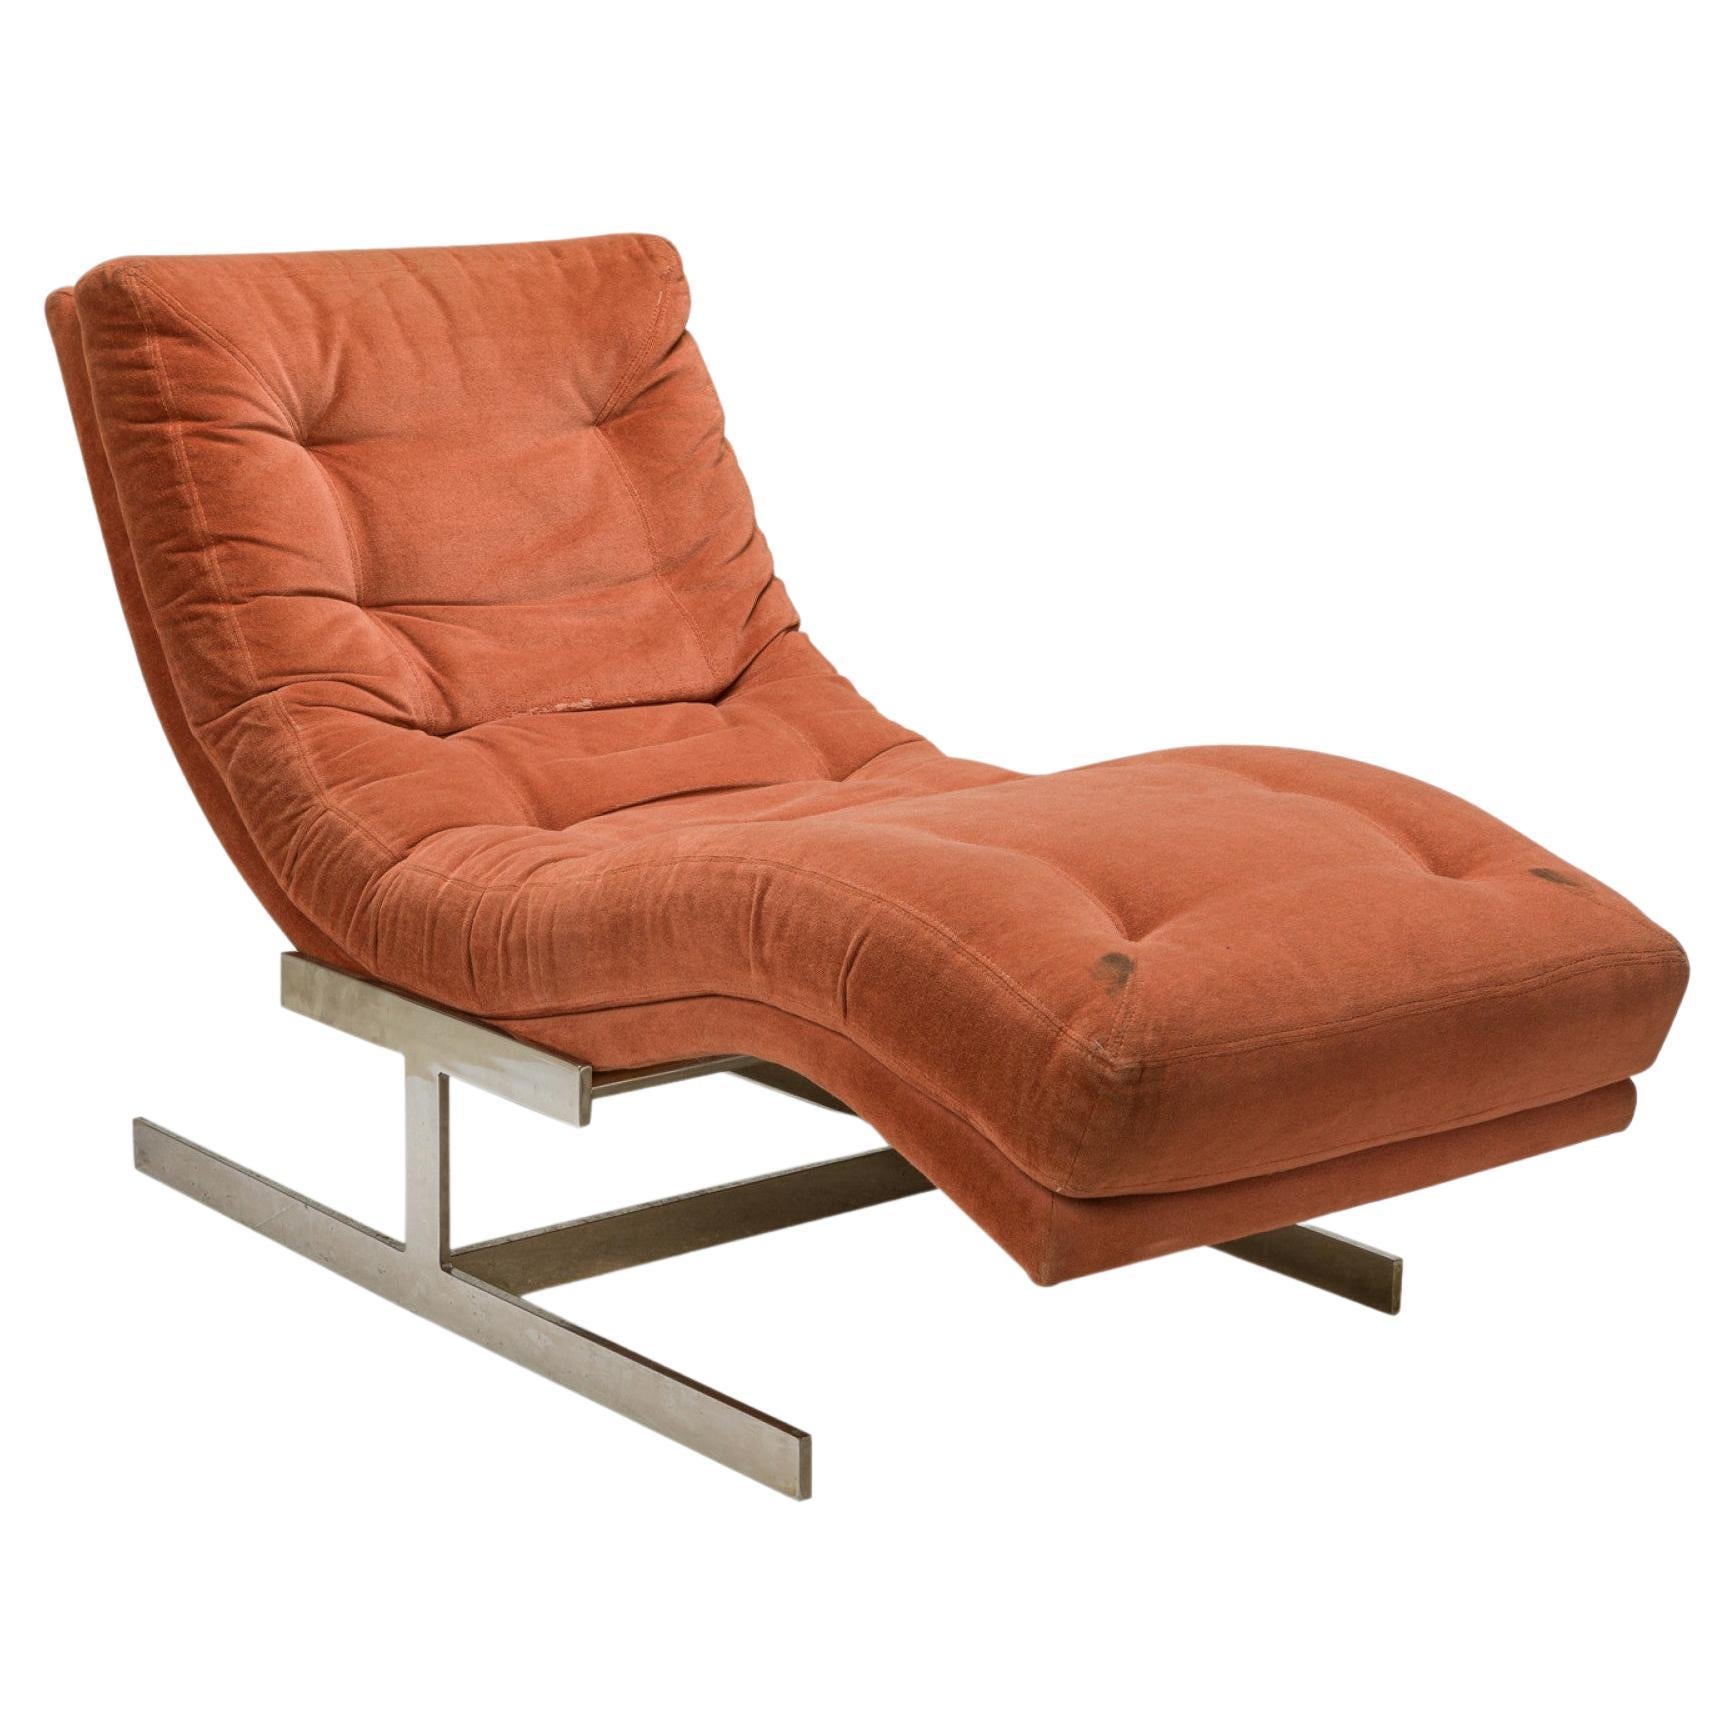 Carsons Orange Velour and Chrome 'Wave' Form Chaise Lounge For Sale